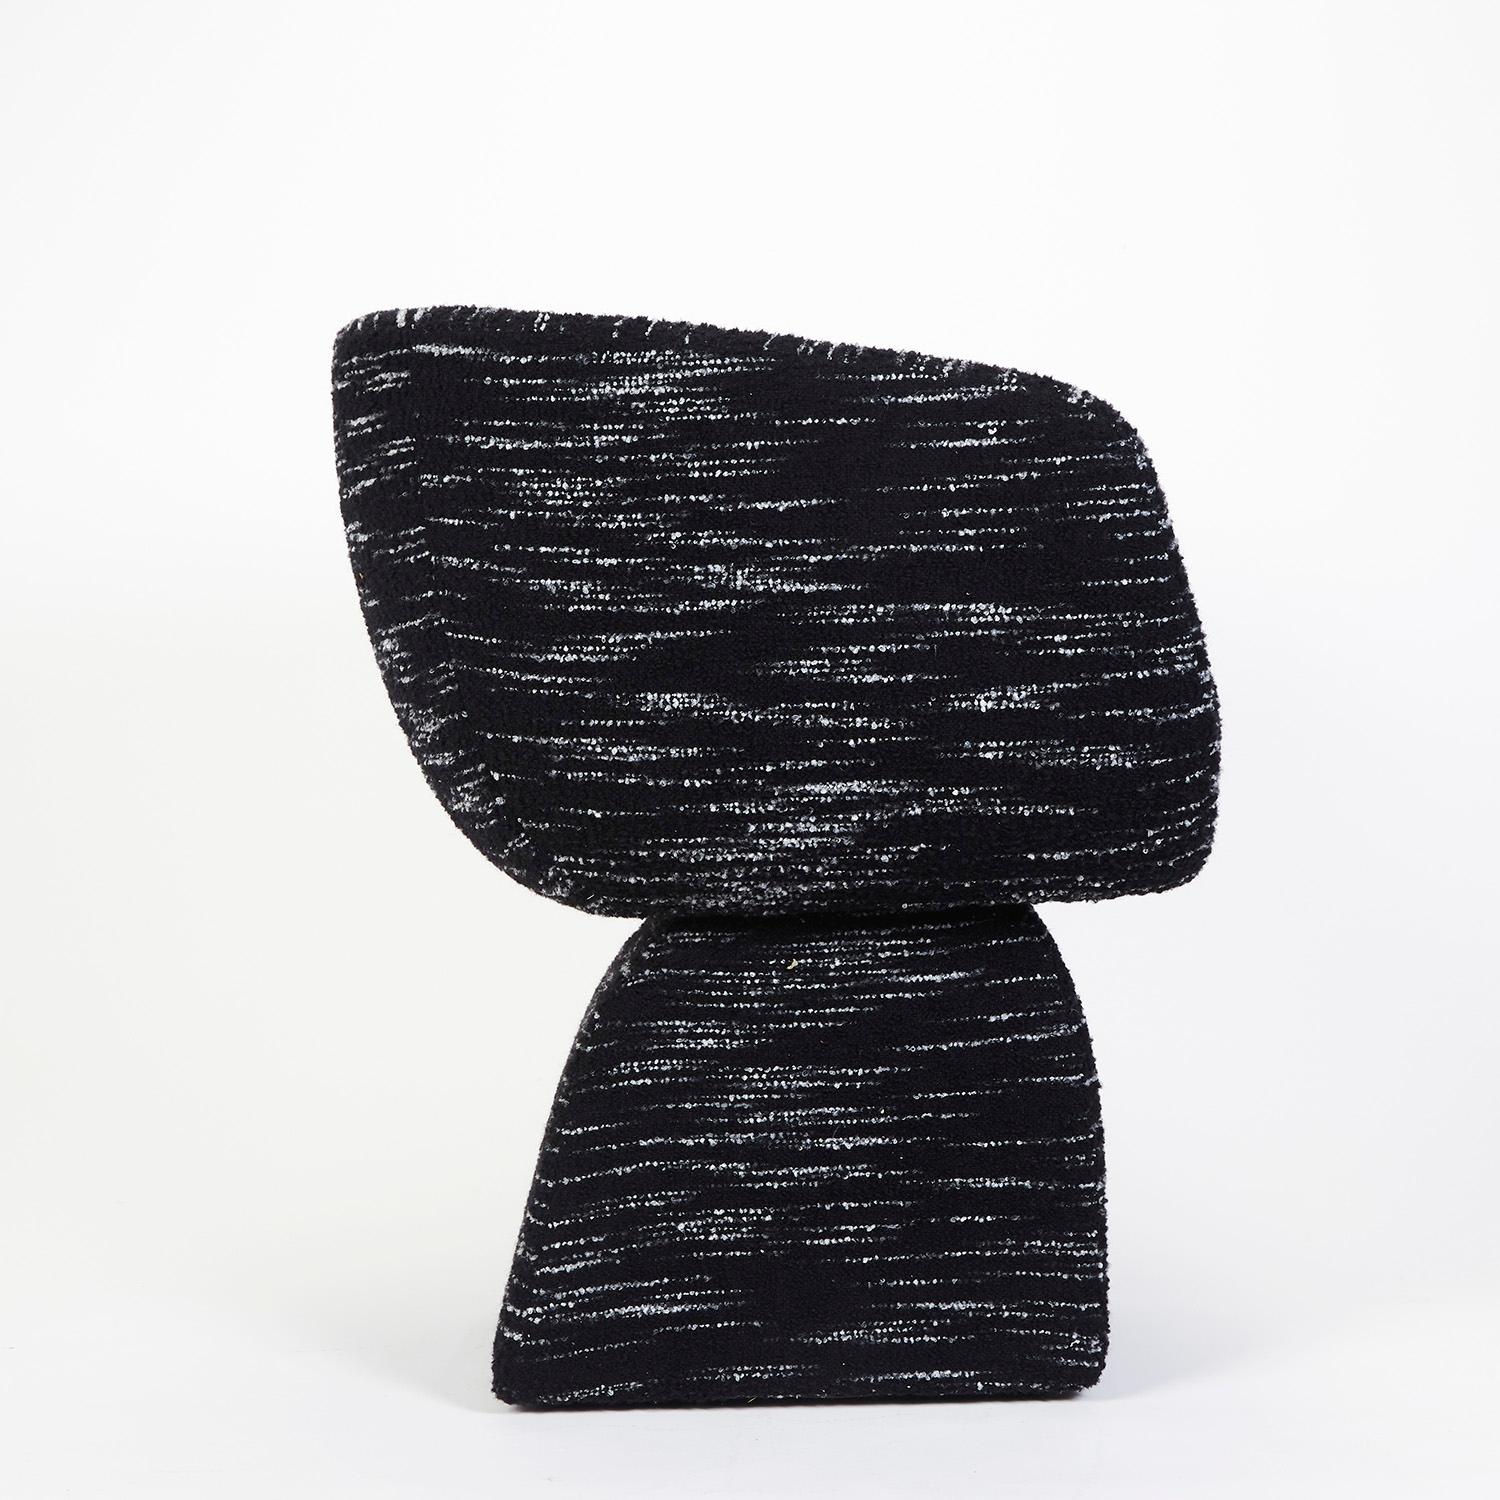 Oscar Chair, Upholstered in a Special Bouclé, Handcrafted in Portugal by Duistt

Inspired by the poetic curved lines of Oscar Niemeyer’s architecture, Oscar chair allures for its sensual and free-flowing curves. Like Niemeyer once said “Curves make